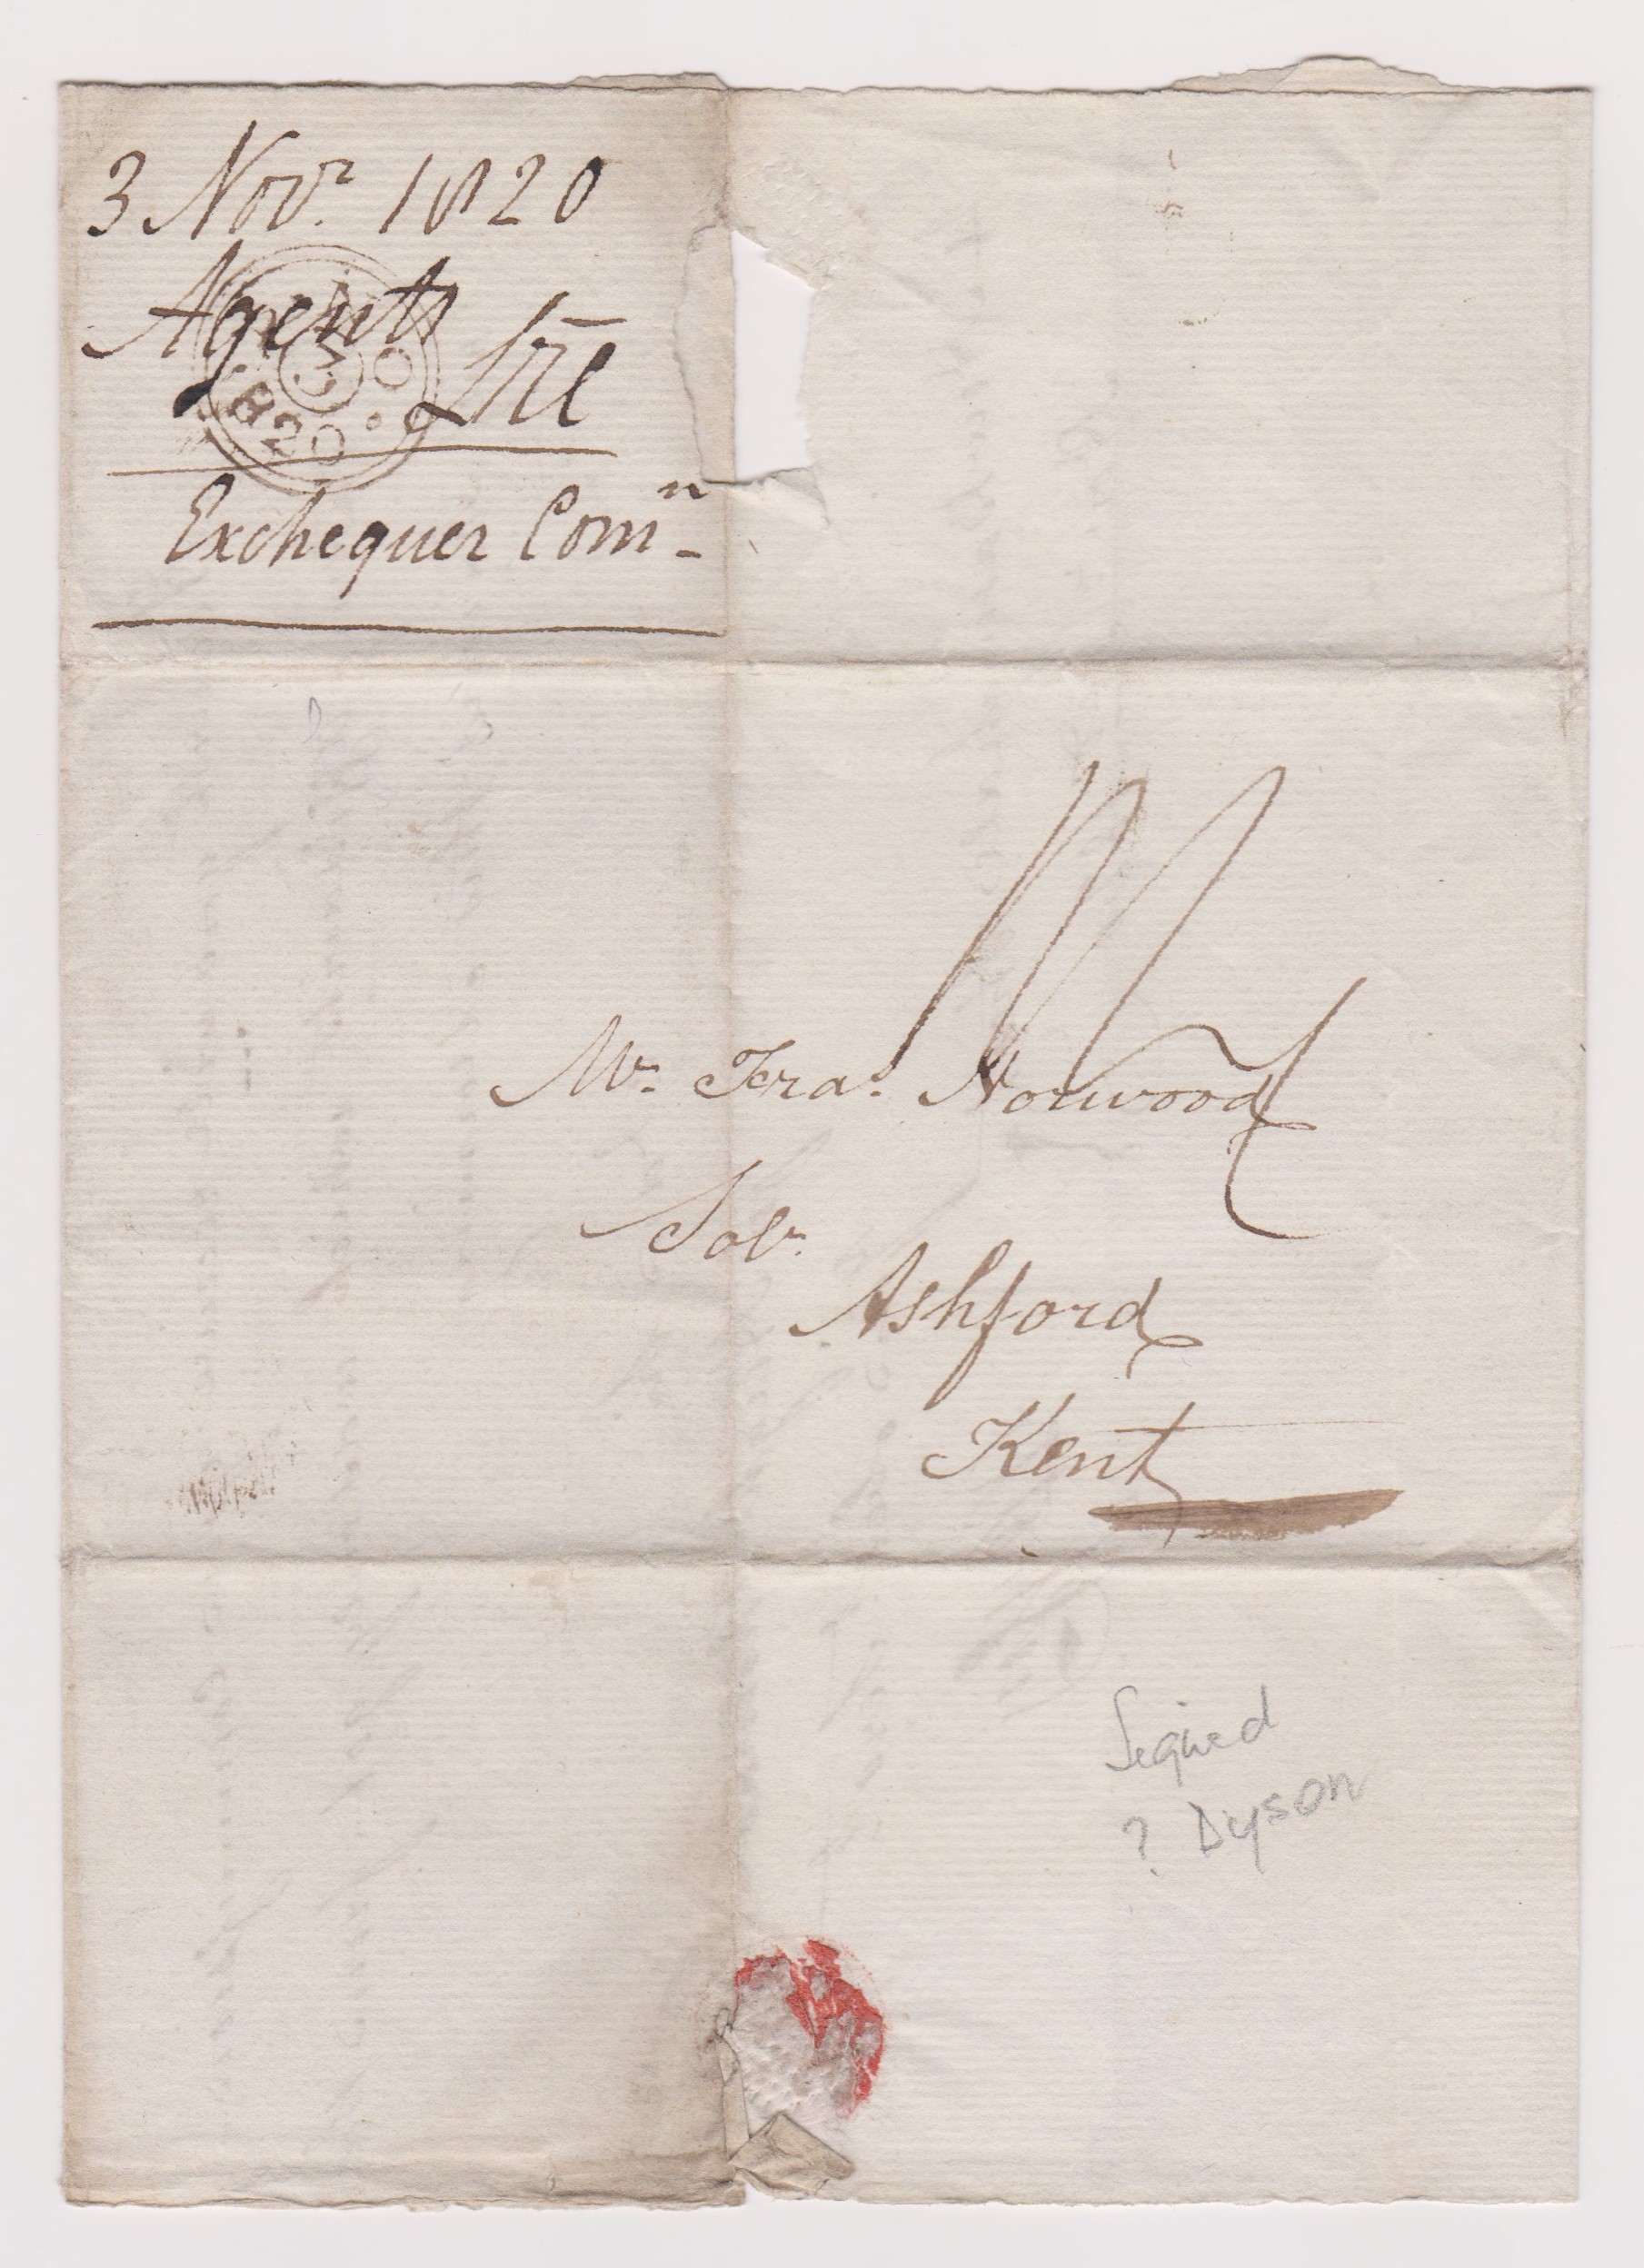 Great Britain 1820-Postal History EL dated Nov 3rd 1820 New Basinghale Street posted to Ashford